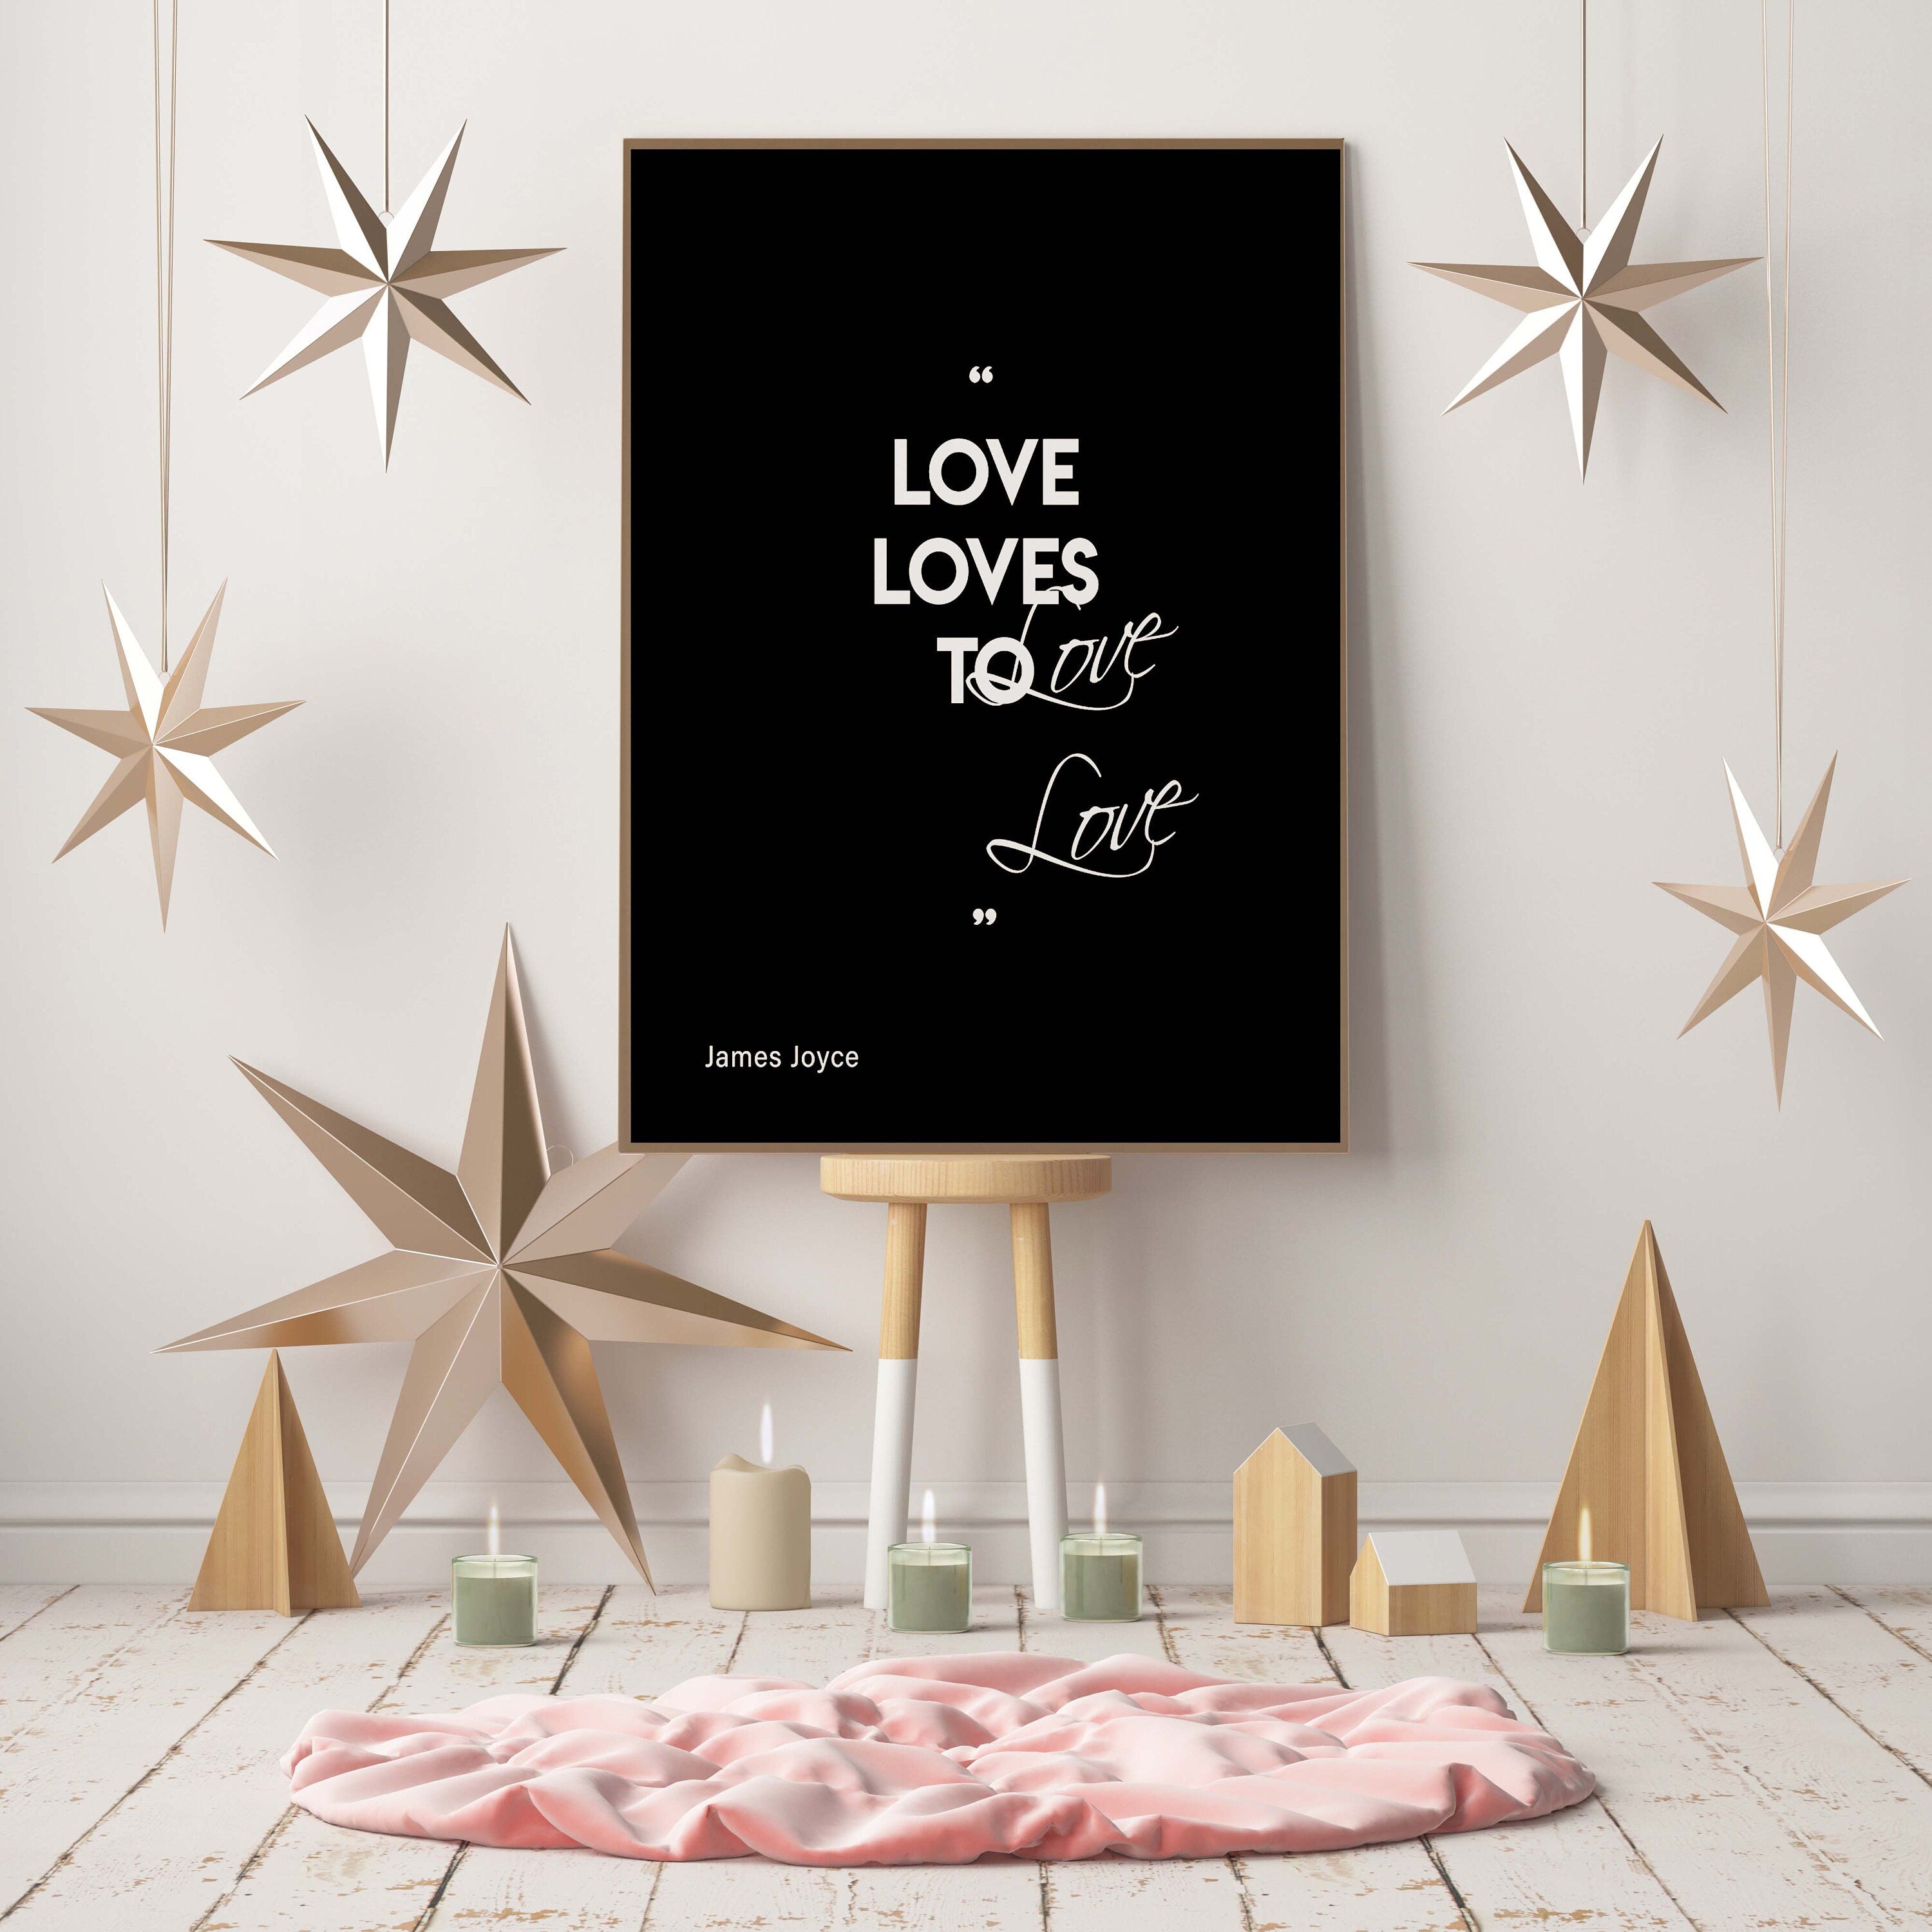 Love Loves to Love James Joyce Quote Wall Art Prints, Unframed Ulysses Wall Decor in Black and White